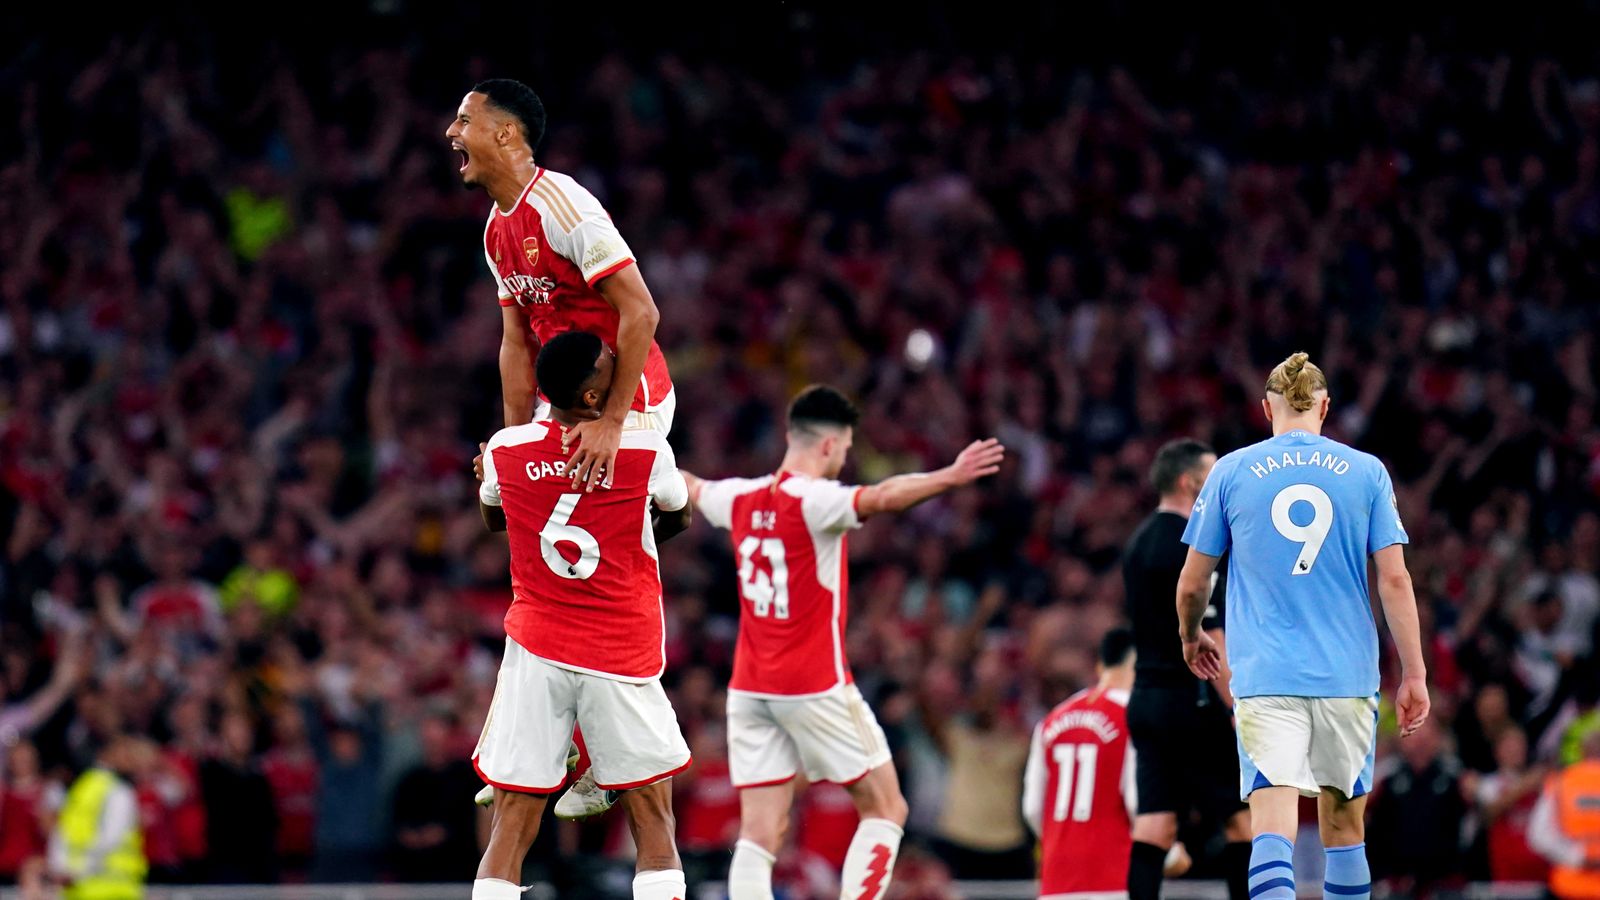 Arsenal 1-0 Man City: Mikel Arteta's side have grown in depth and size and Pep Guardiola has a title race on his hands | Football News